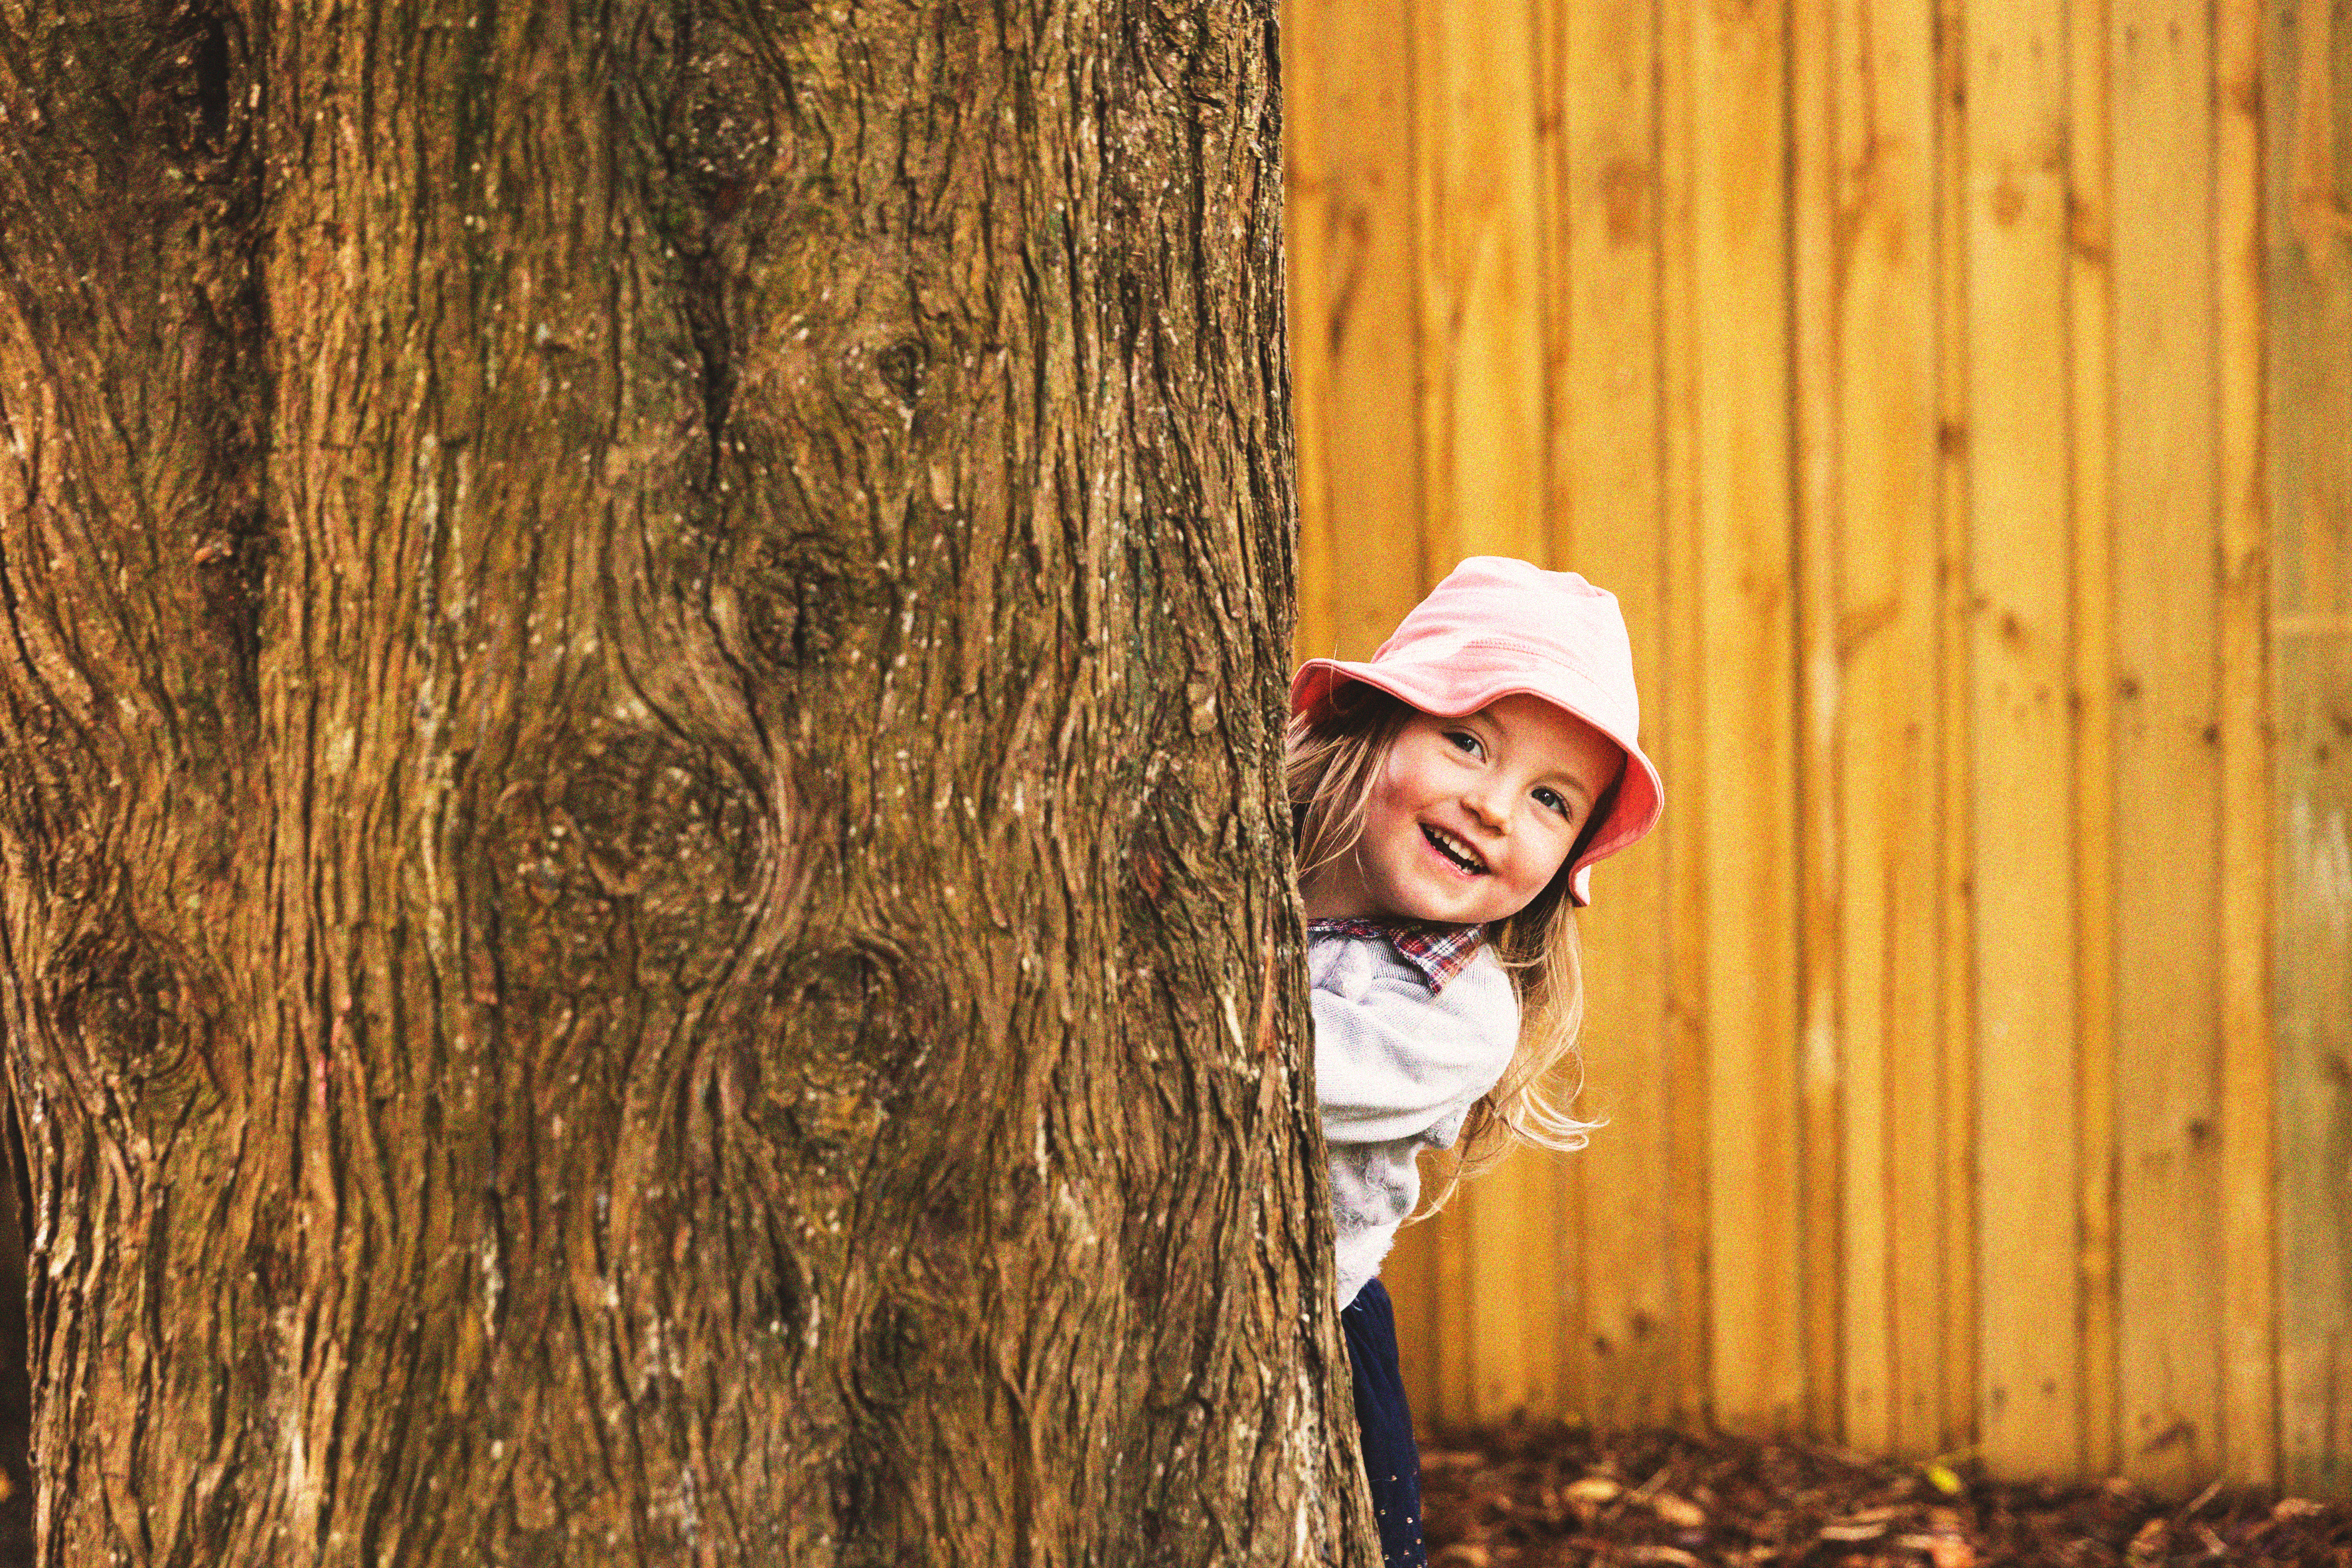 A young girl leaning out from behind a tree